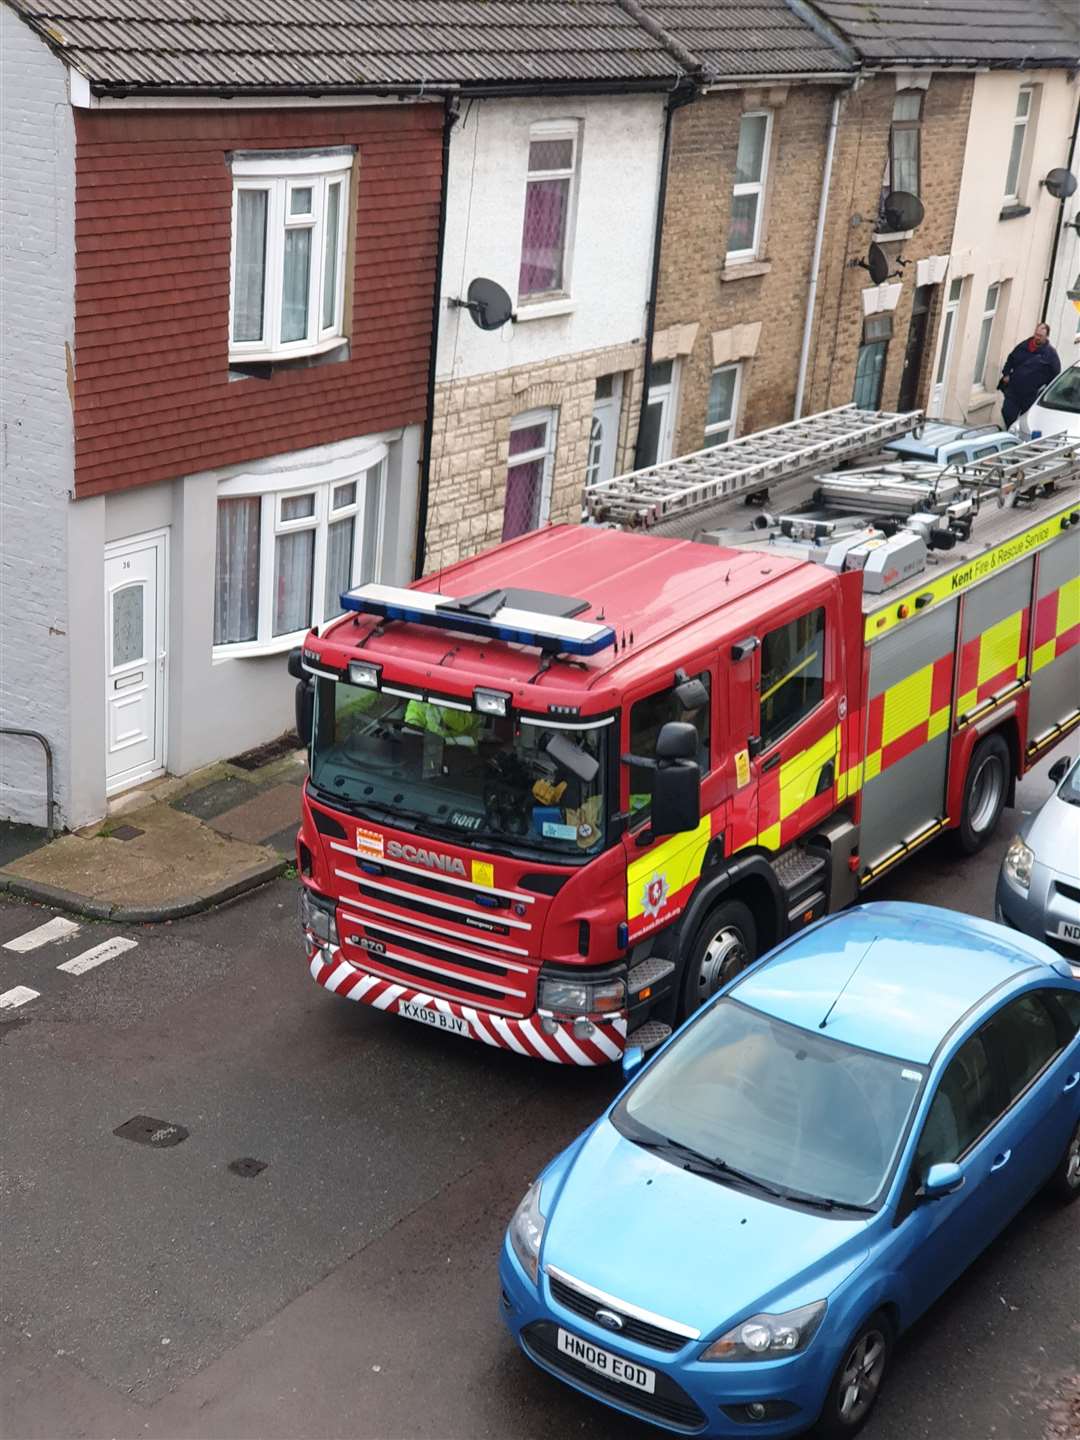 A fire crew was also called to the scene at Chalk Pitt Hill